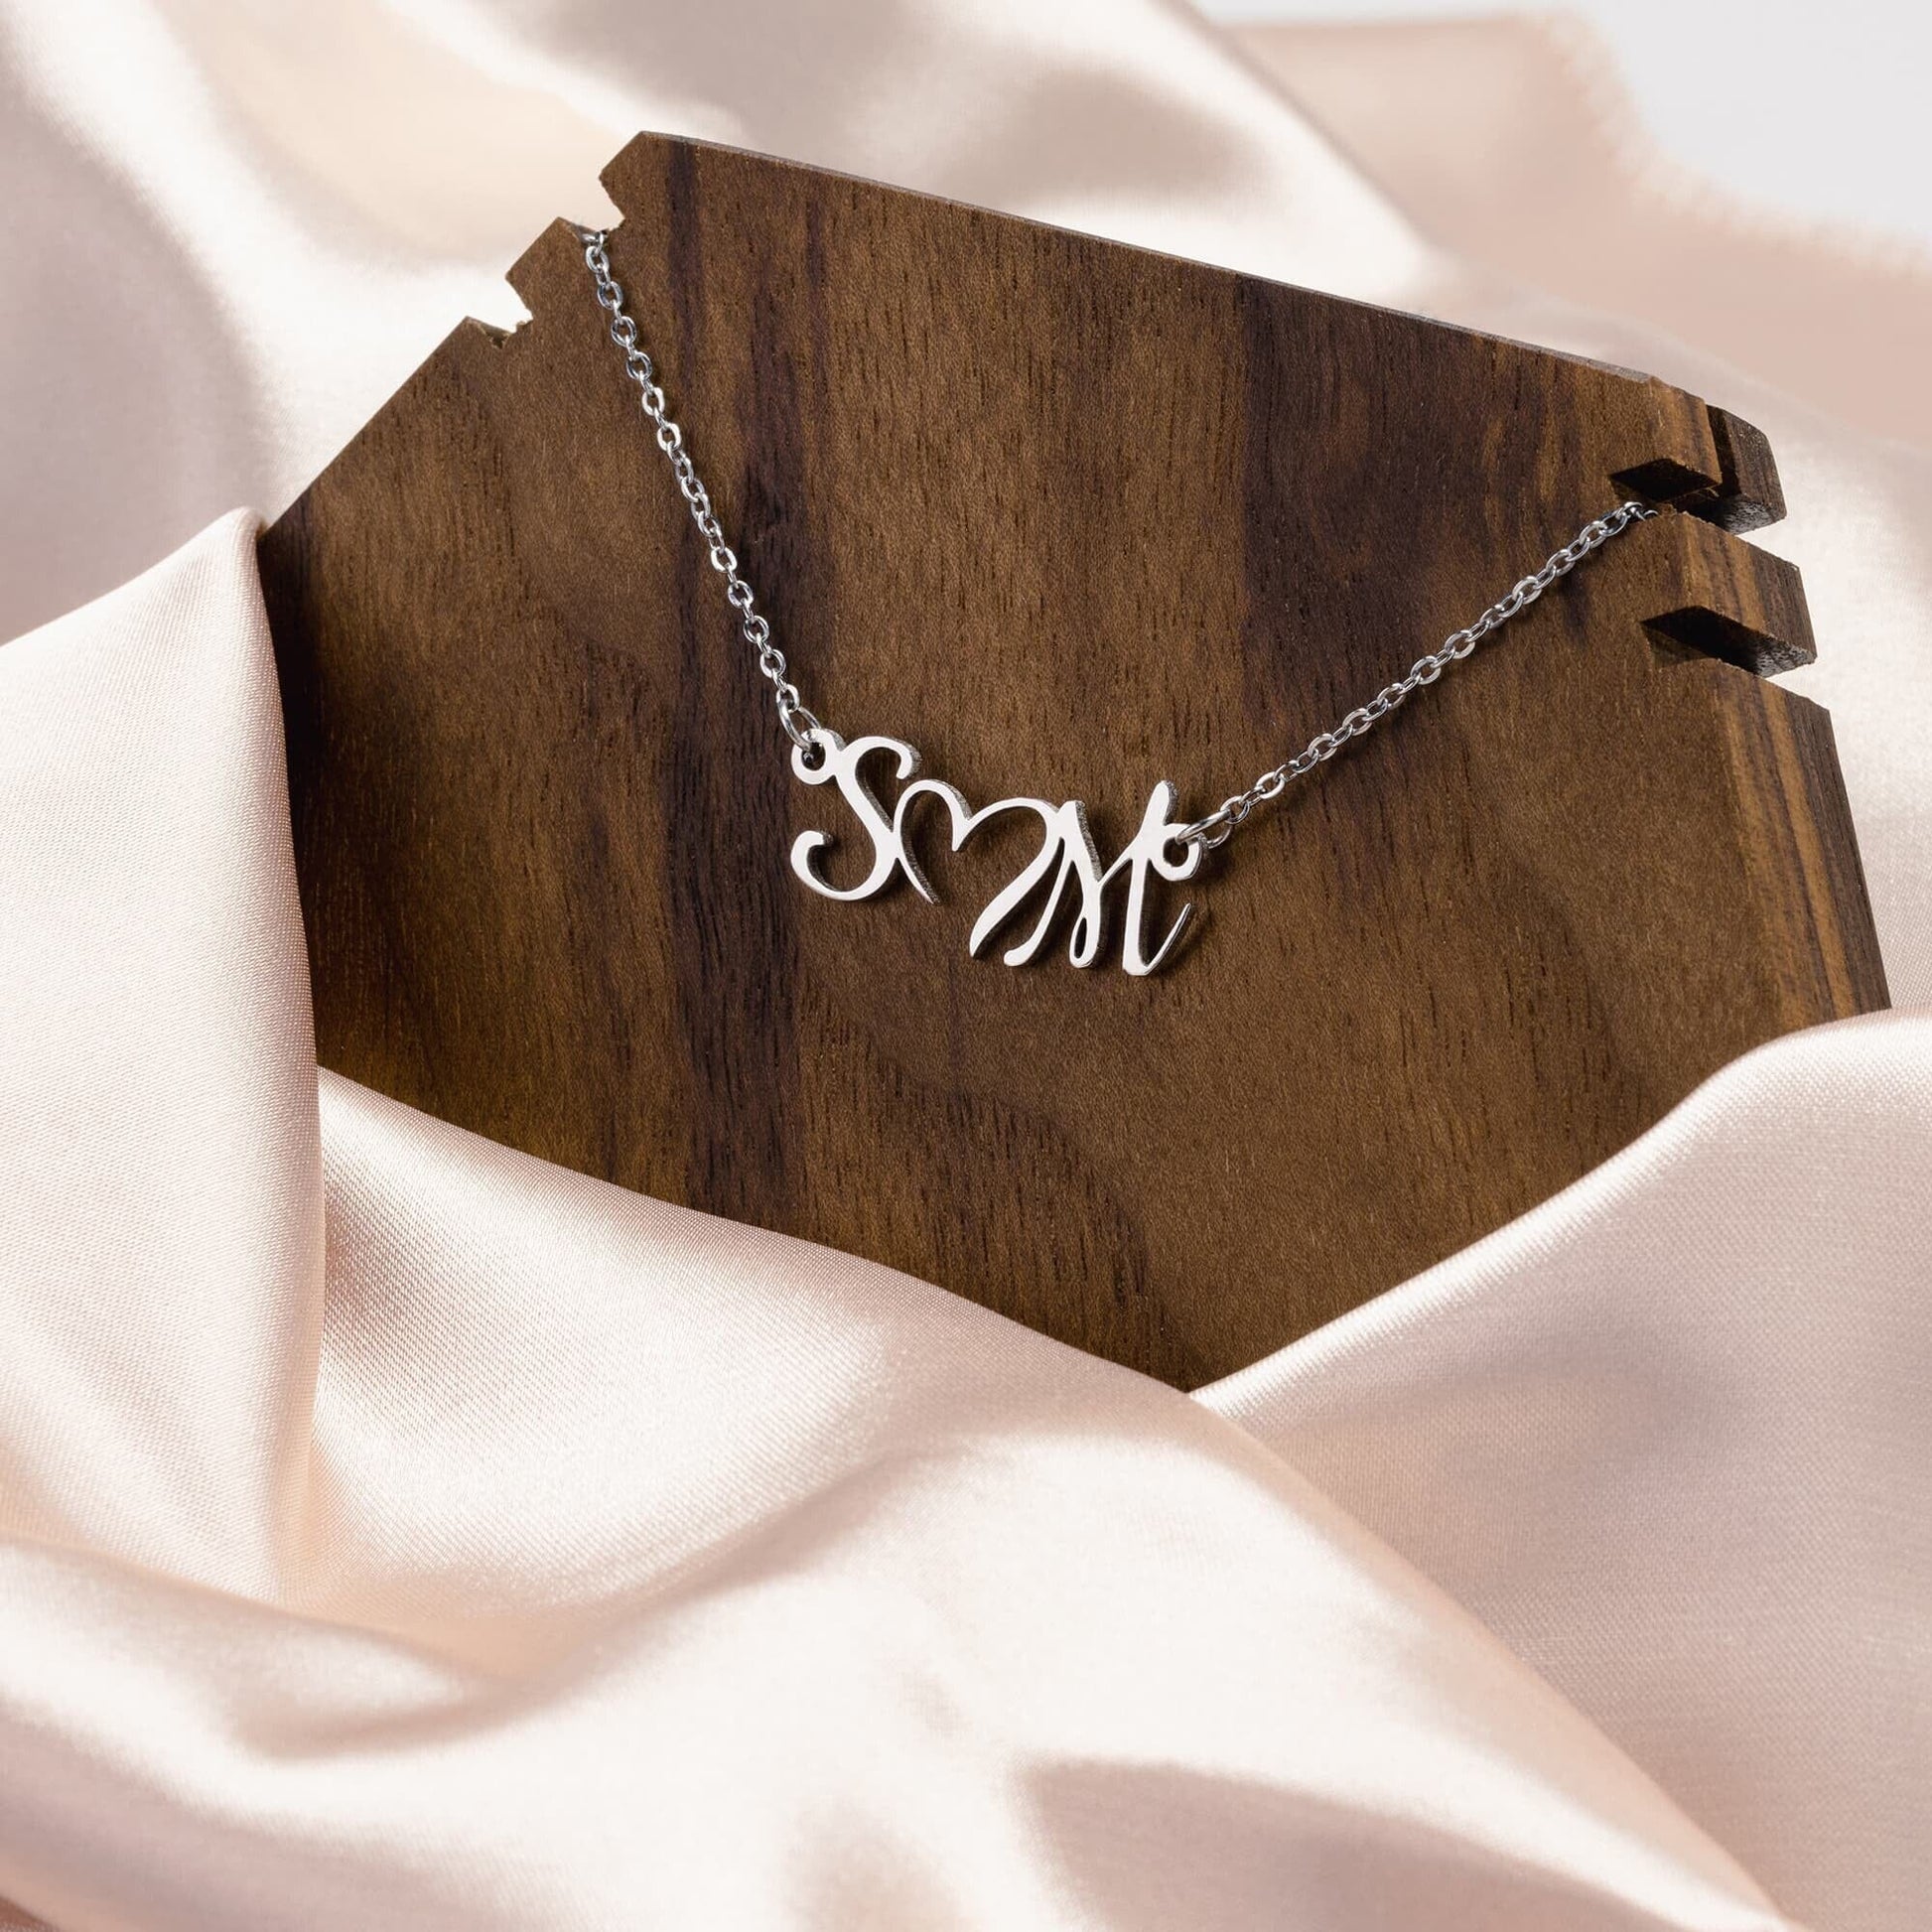 Personalized Heart Necklace With Initials - HGF#227HI Jewelry 